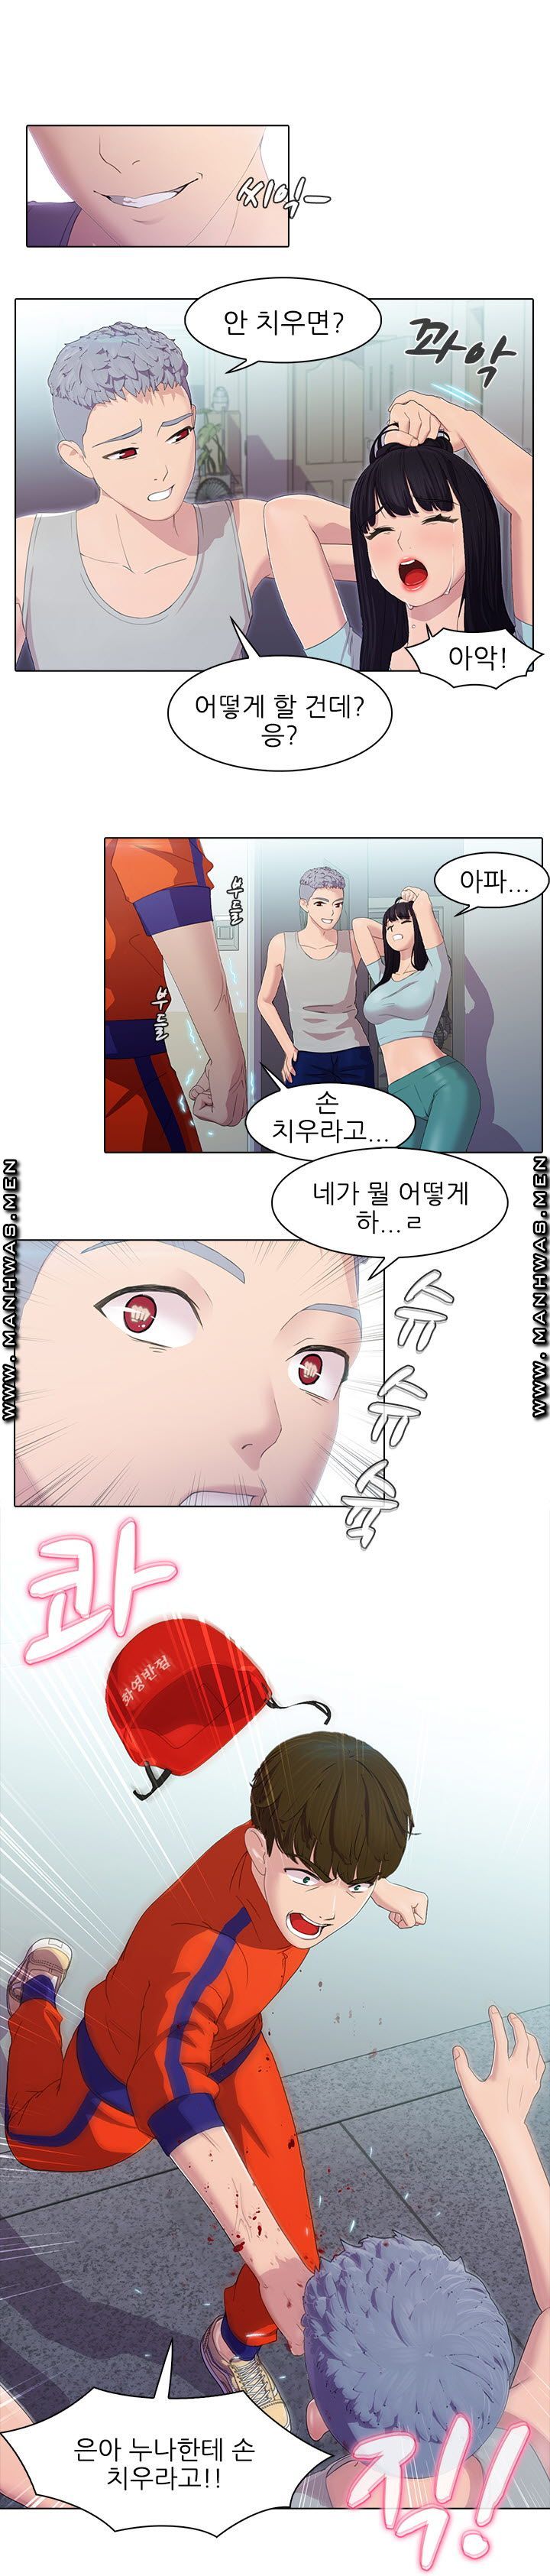 Sister's Friend Raw - Chapter 1 Page 7